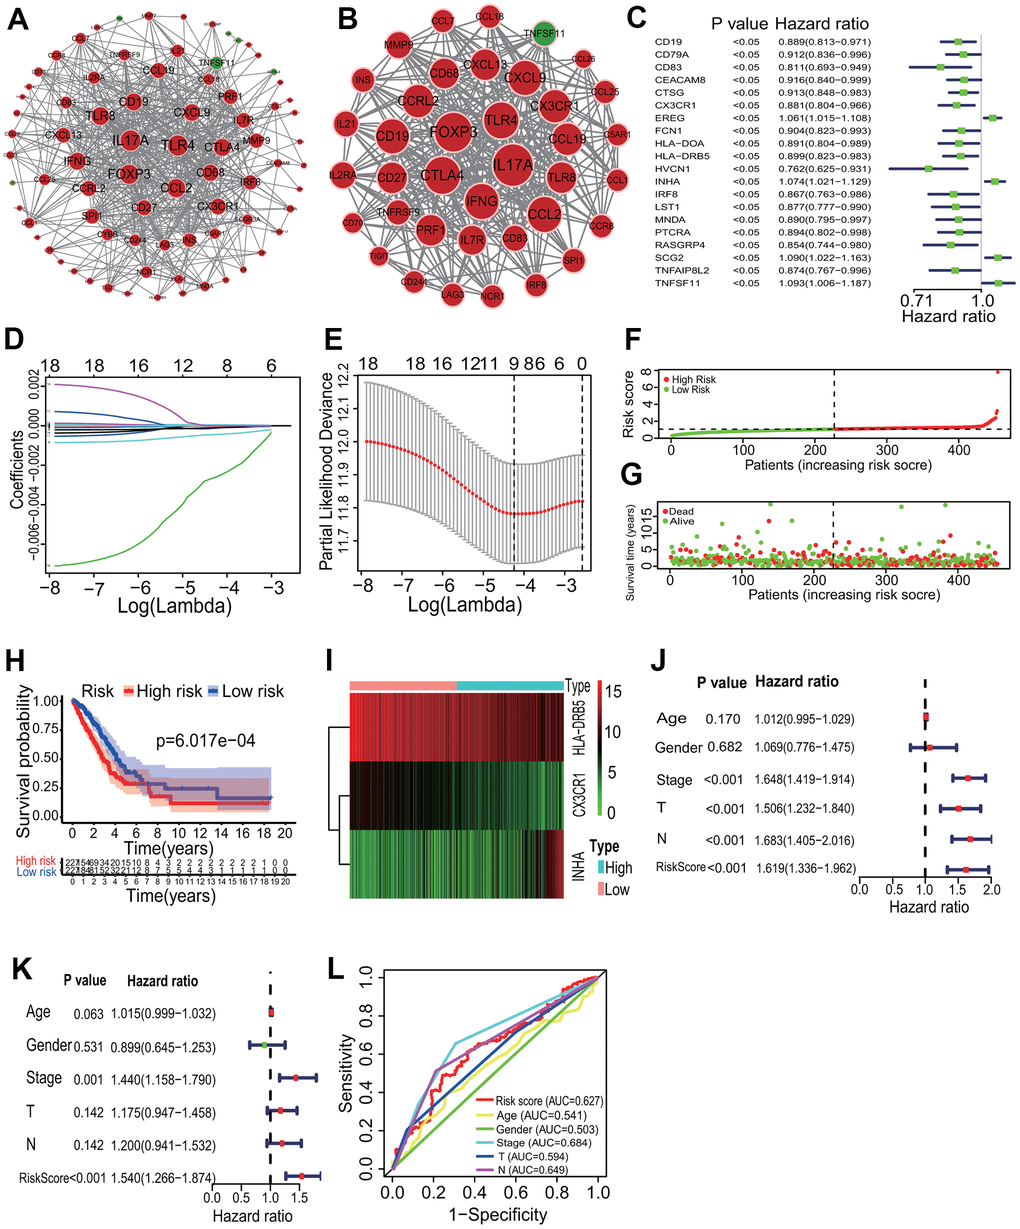 Key immune gene identification and prognostic immune signature construction. (A) PPI network of immune DEGs. An immune PPI network with 79 nodes and 538 edges was established. (B) Highly correlated PPI network. An immune PPI subnetwork with 38 nodes and 372 edges was constructed in the whole immune PPI network. (C) Univariate regression analysis. Twenty immune genes had significantly prognostic values. (D, E) LASSO Cox analysis. Nine immune genes most correlated with the overall survival were identified, and 10-round cross validation was performed to prevent overfitting. (F) Risk score distribution. LUAD patients were divided into the high- and low-risk groups according to the median risk score. (G) Survival overview. The distribution of survival times of LUAD patients in the high- and low-risk groups. (H) Survival curve. A better overall survival of patients in the low-risk group was exhibited than that in the high-risk group. (I) Heatmap of gene expression. HLA-DRB5 and CX3CR1 were highly expressed and INHA was lowly expressed in the high-risk group. (J, K) Independent prognostic analysis. The 3-mRNA risk signature was significantly correlated with the OS of LUAD patients by a univariate and a multivariate Cox regression analysis. (L) ROC curve. The AUC of 3-year survival was 0.627. PPI, protein and protein interaction; LASSO, least absolute shrinkage and selection operator; LUAD, lung adenocarcinoma; ROC, receiver operating characteristic; AUC, area under the curve; OS, overall survival.